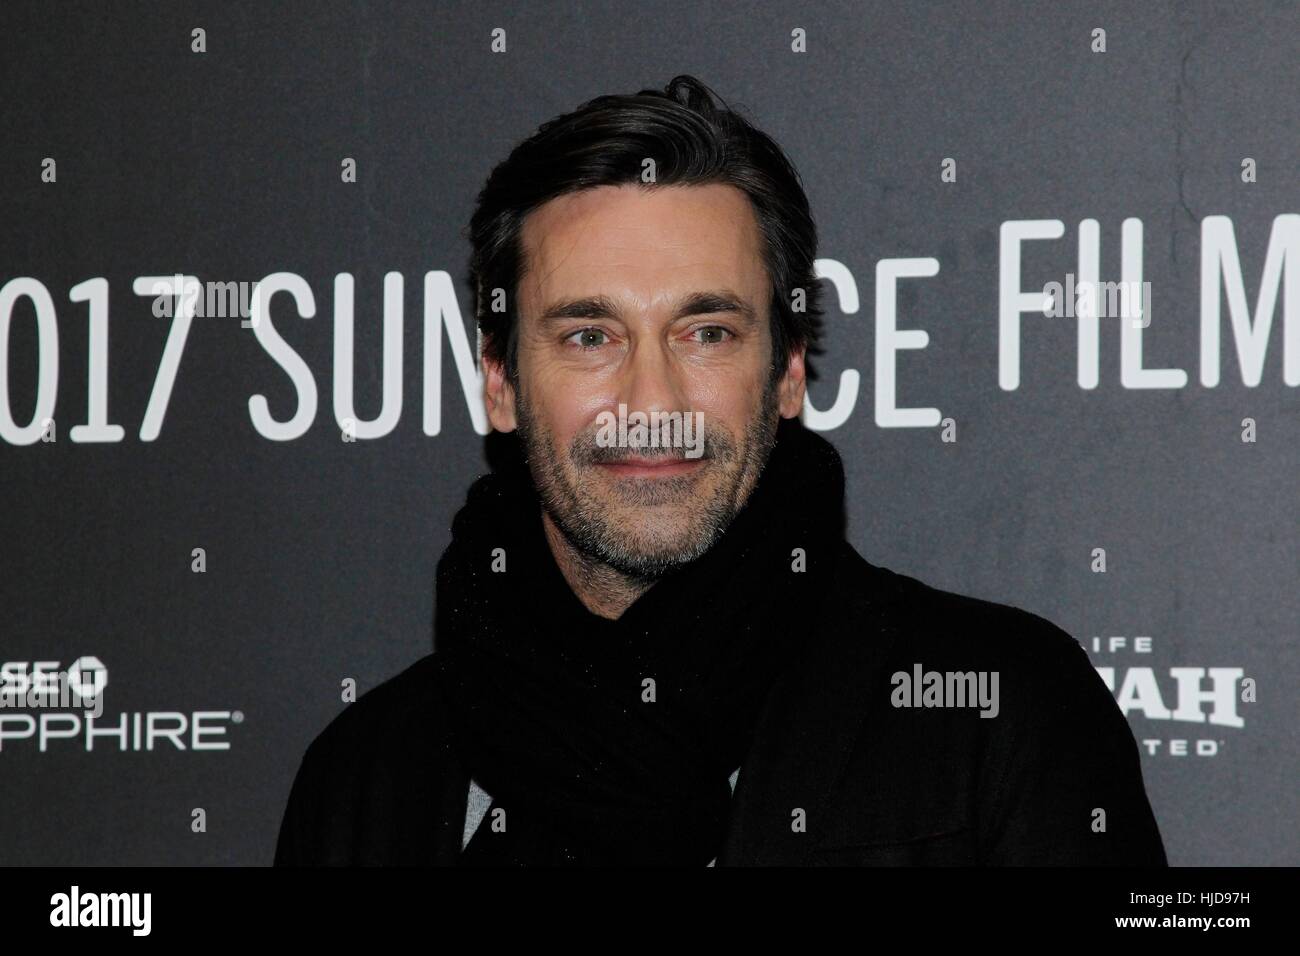 New York, NY, USA. 23rd Jan, 2017. Jon Hamm at arrivals for MARJORIE PRIME Premiere at Sundance Film Festival 2017, Eccles Theatre, New York, USA. January 23, 2017. Credit: James Atoa/Everett Collection/Alamy Live News Stock Photo